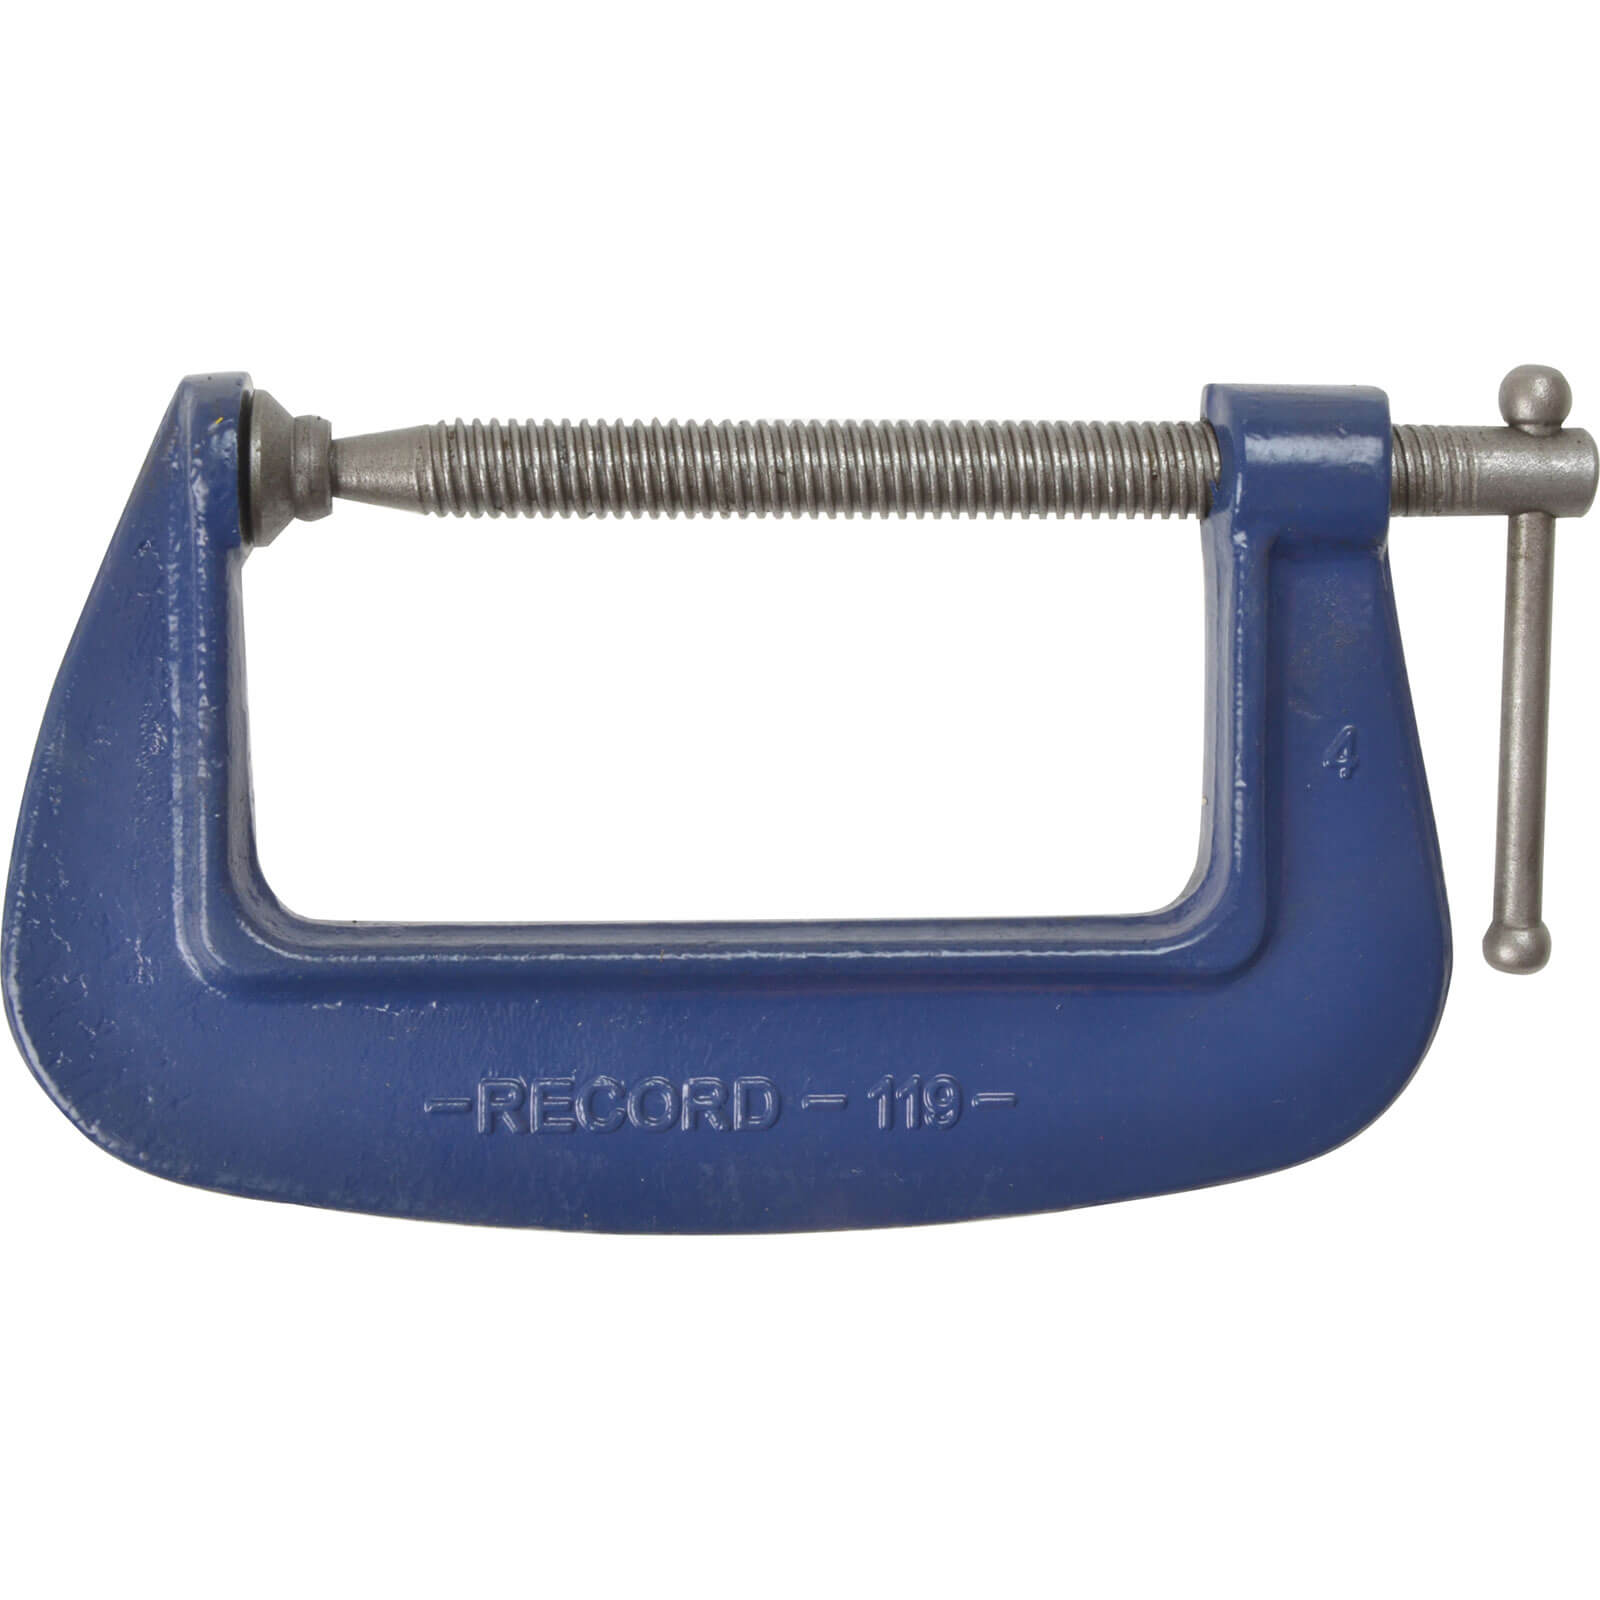 Photo of Irwin Record 119 G Clamp 50mm